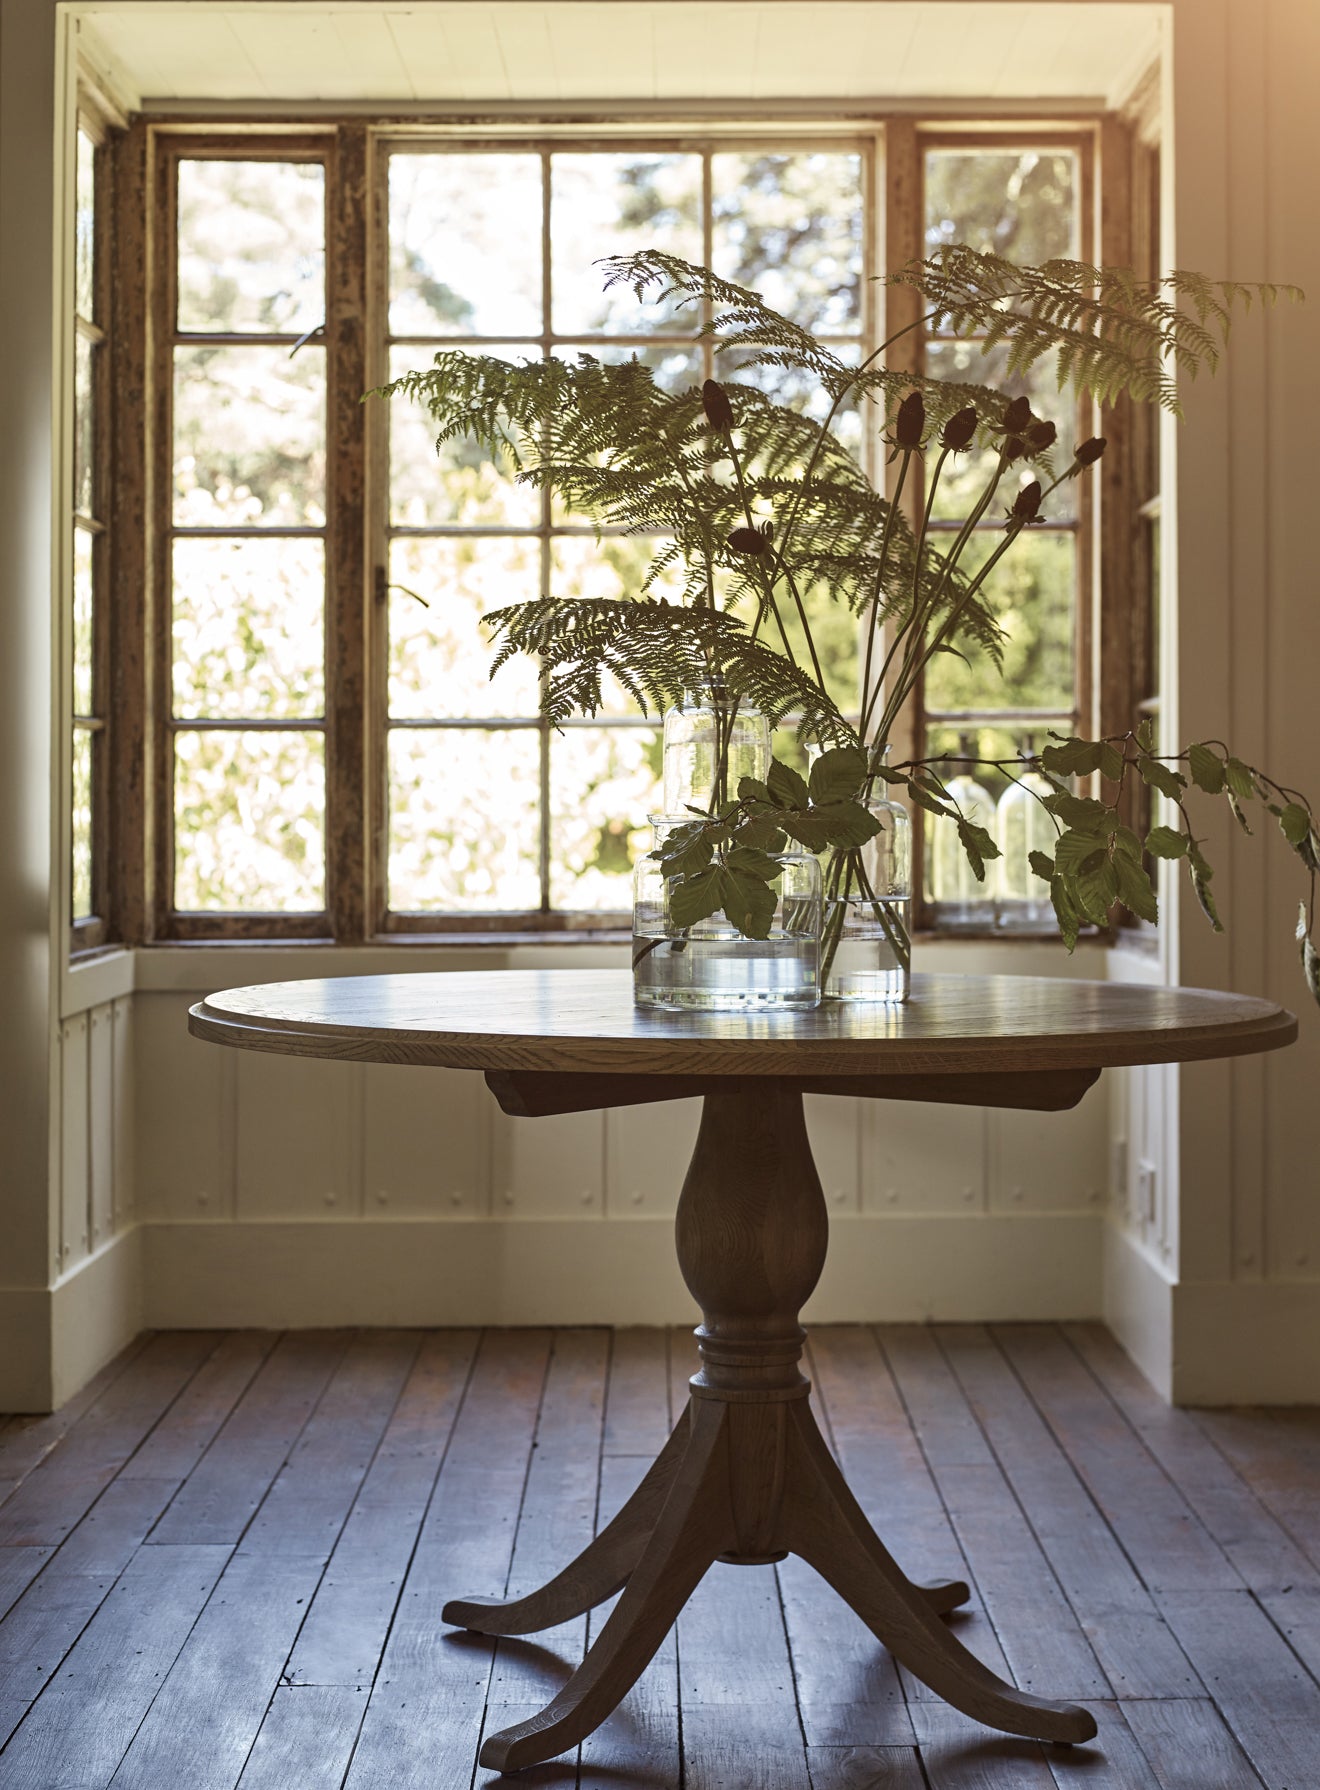 Ellery Round Dining Table